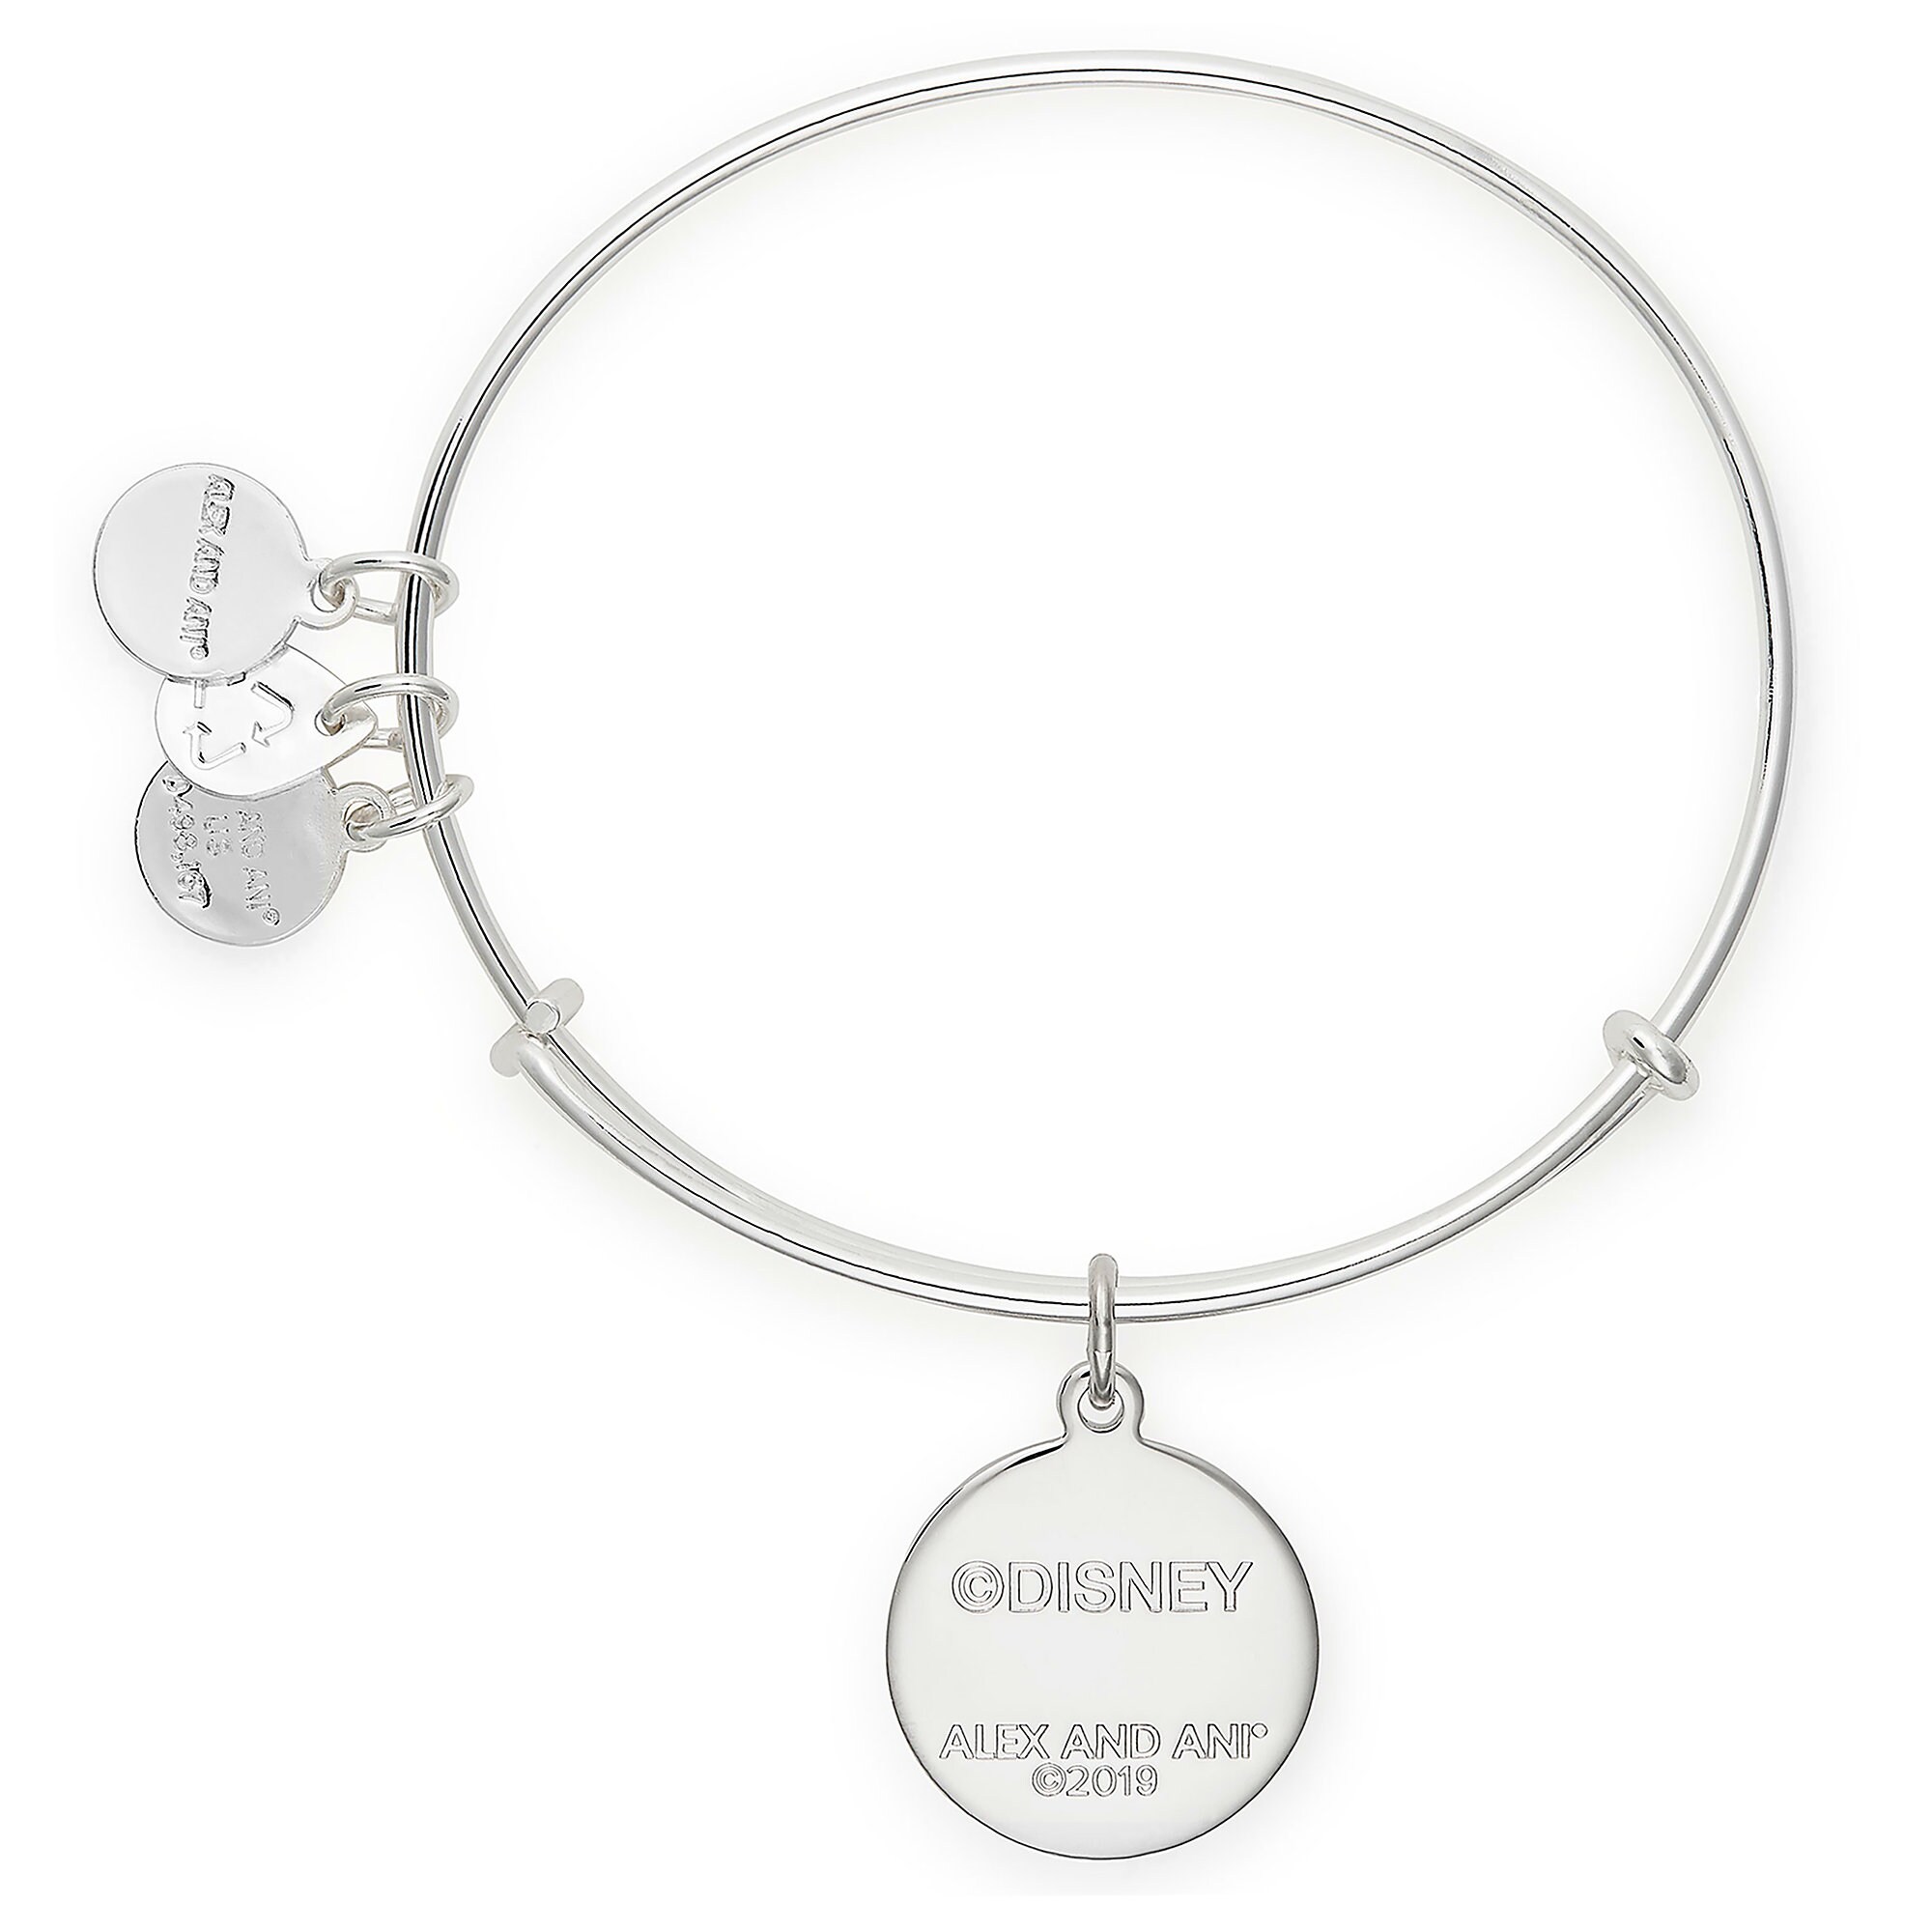 Tiana Bangle by Alex and Ani is now out for purchase – Dis Merchandise News